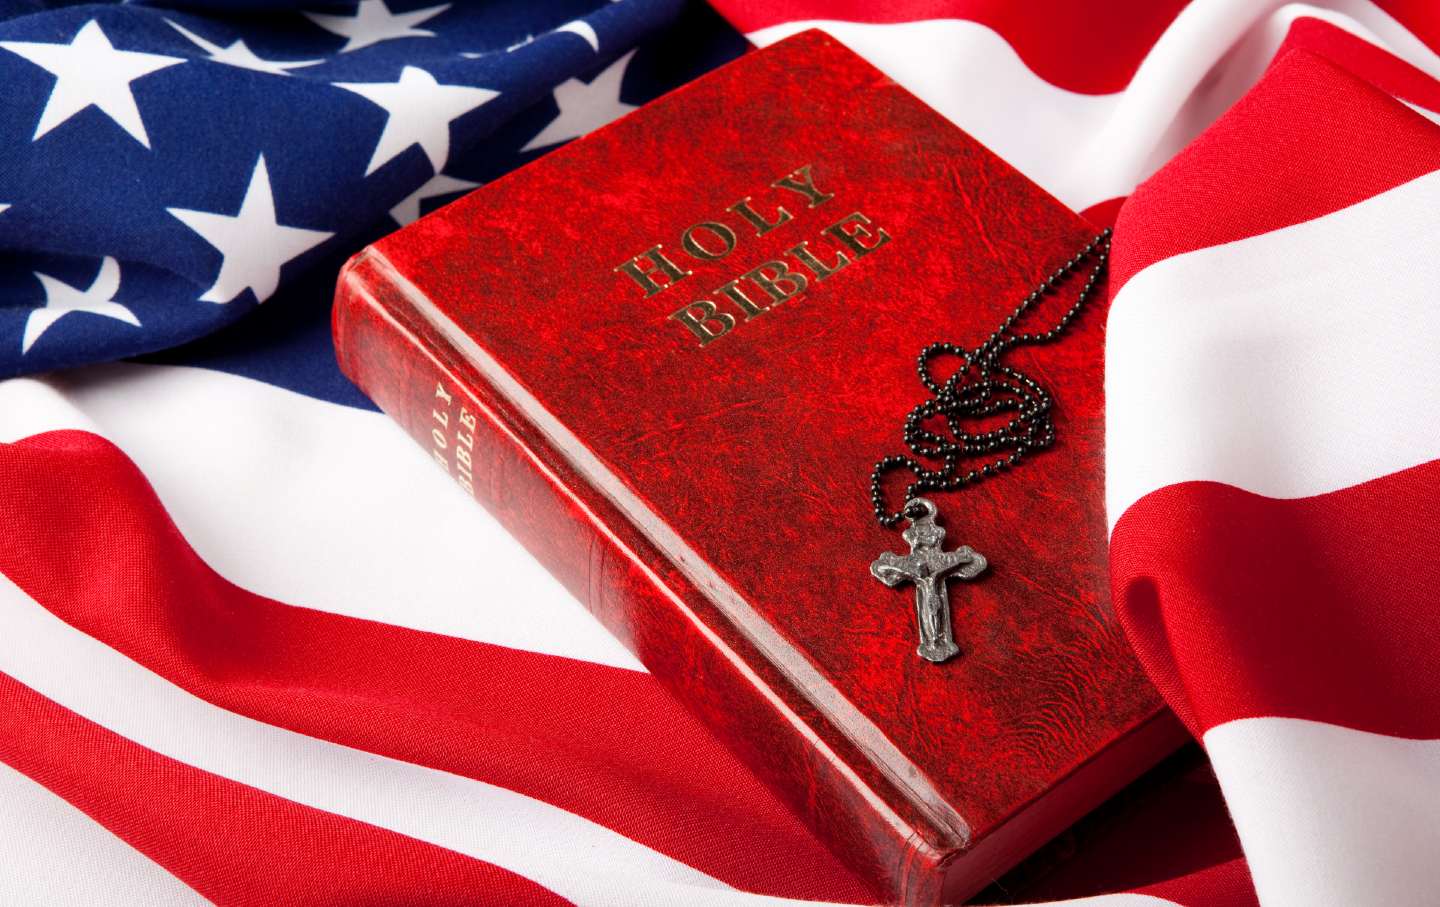 A Bible and cross lie on the American flag.